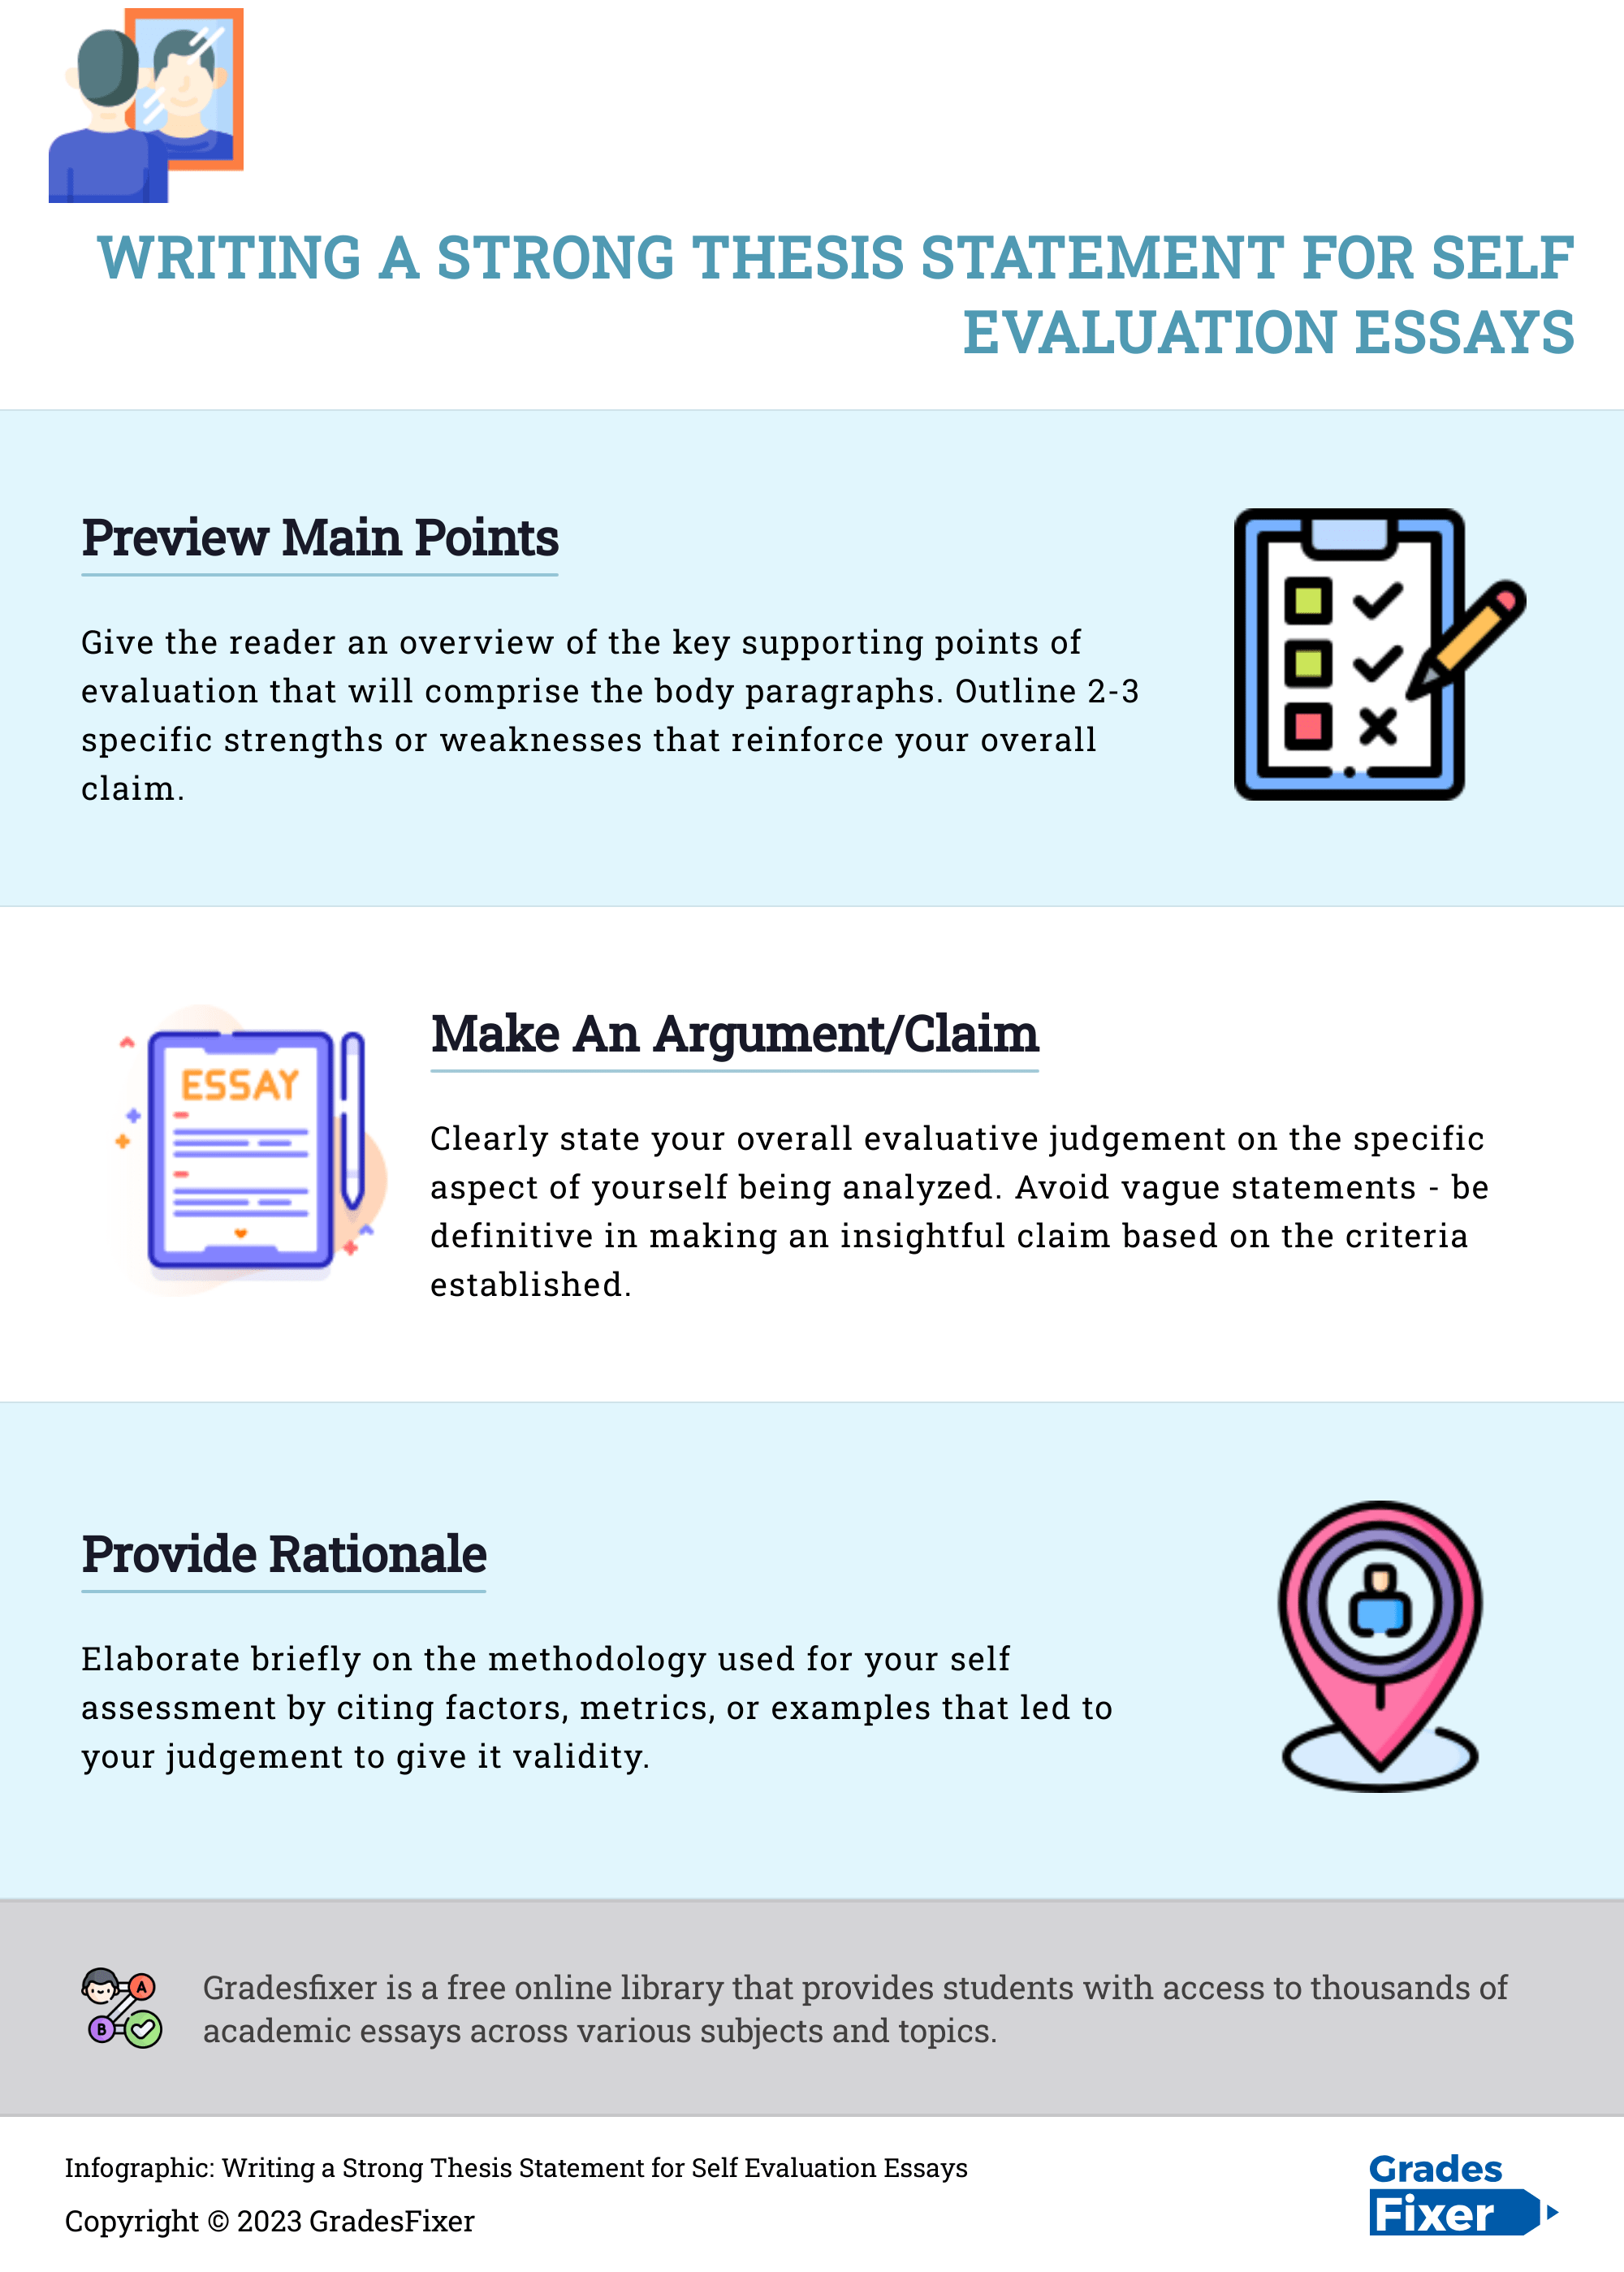 Infographic-Writing-a-Strong-Thesis-Statement-for-Self-Evaluation-Essays